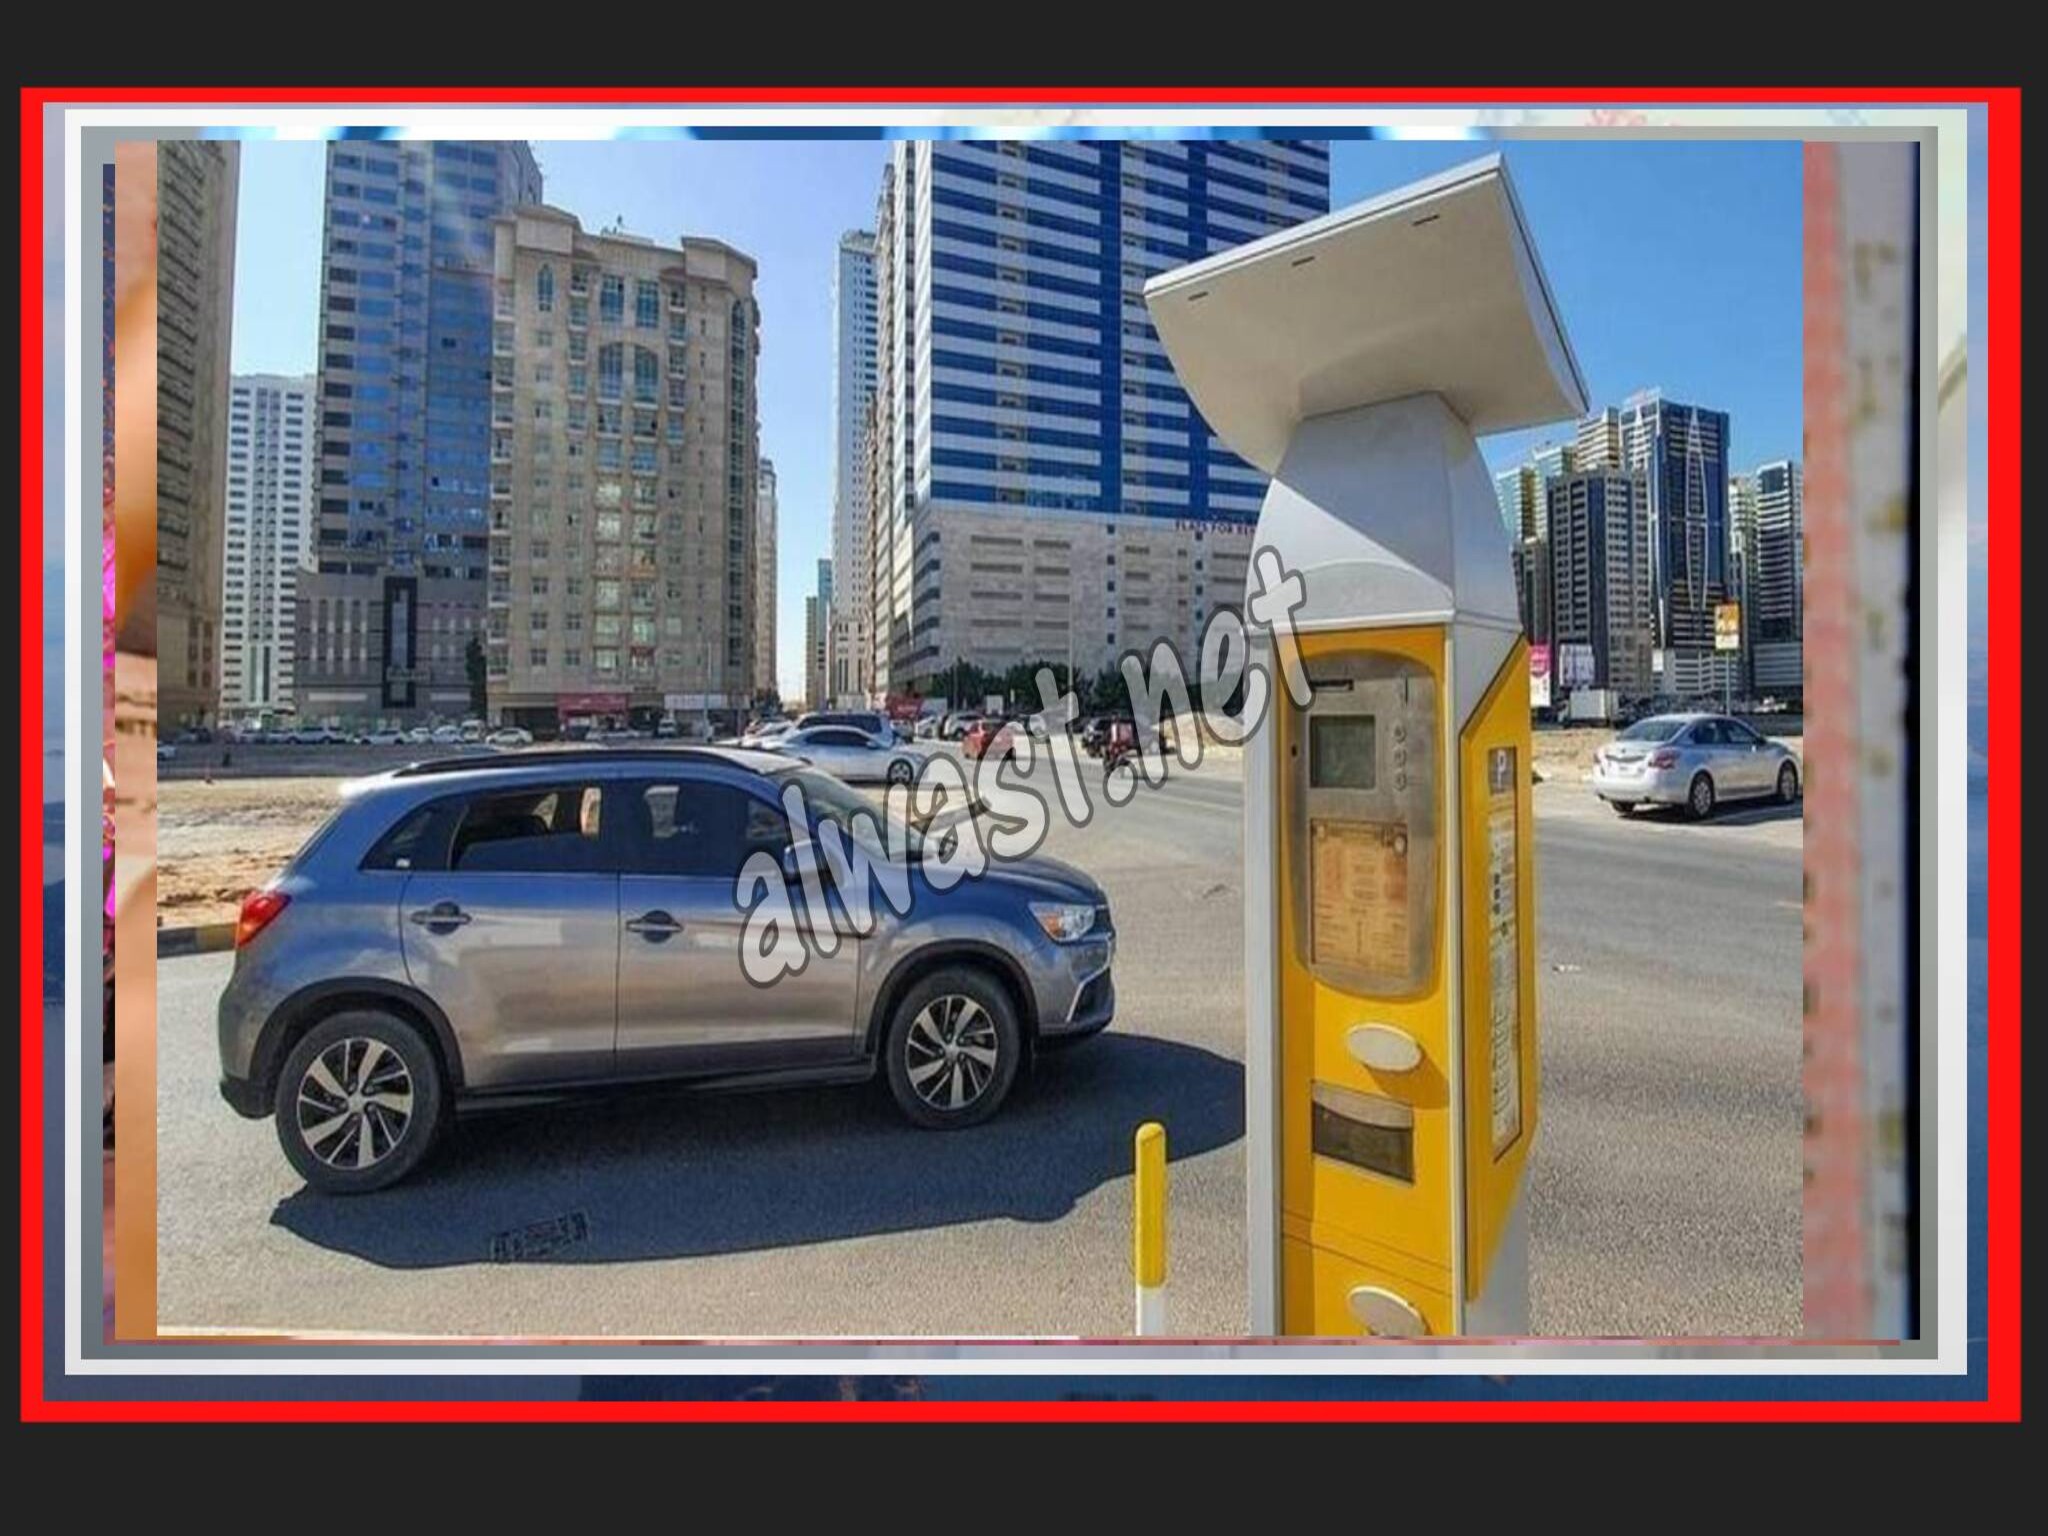 Sharjah announces new free parking for this Citizens of citizens and expatriates